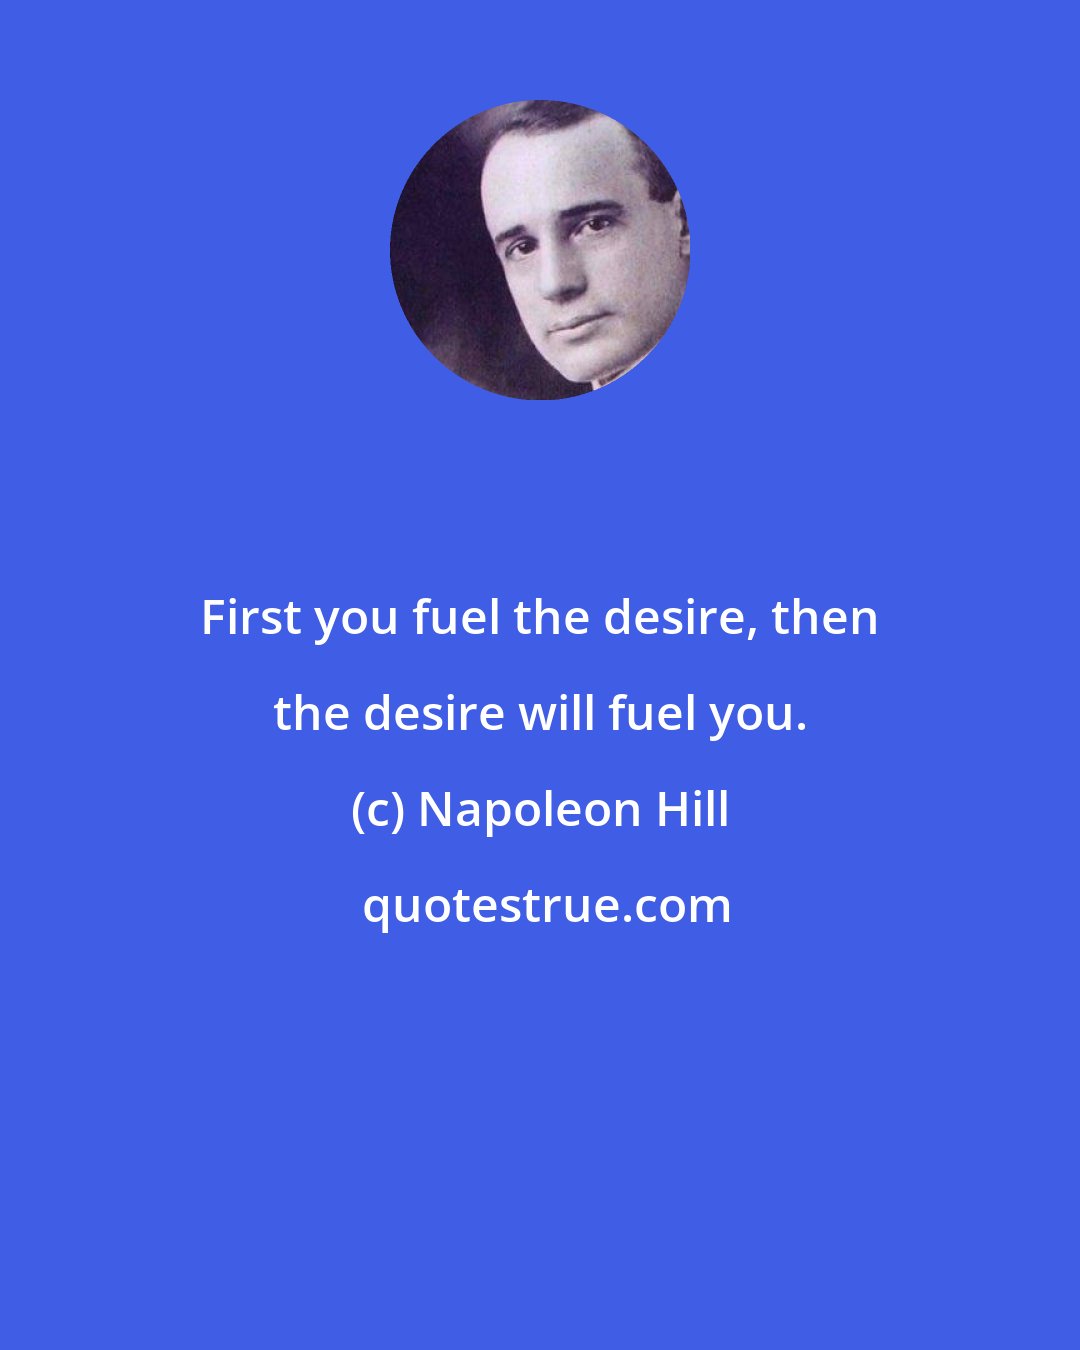 Napoleon Hill: First you fuel the desire, then the desire will fuel you.